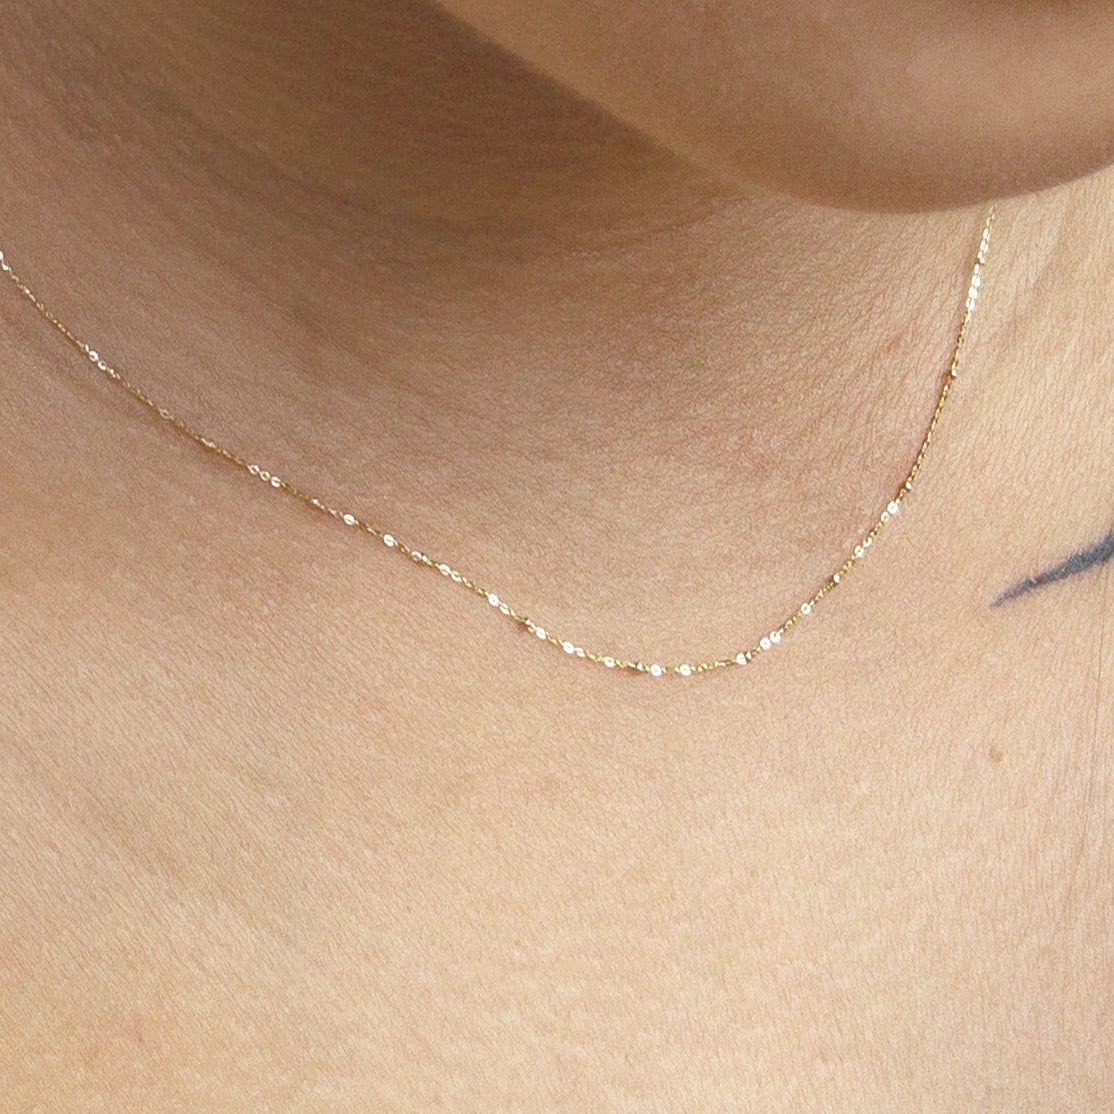 The Ultra Subtle Ball Necklace in Solid Gold